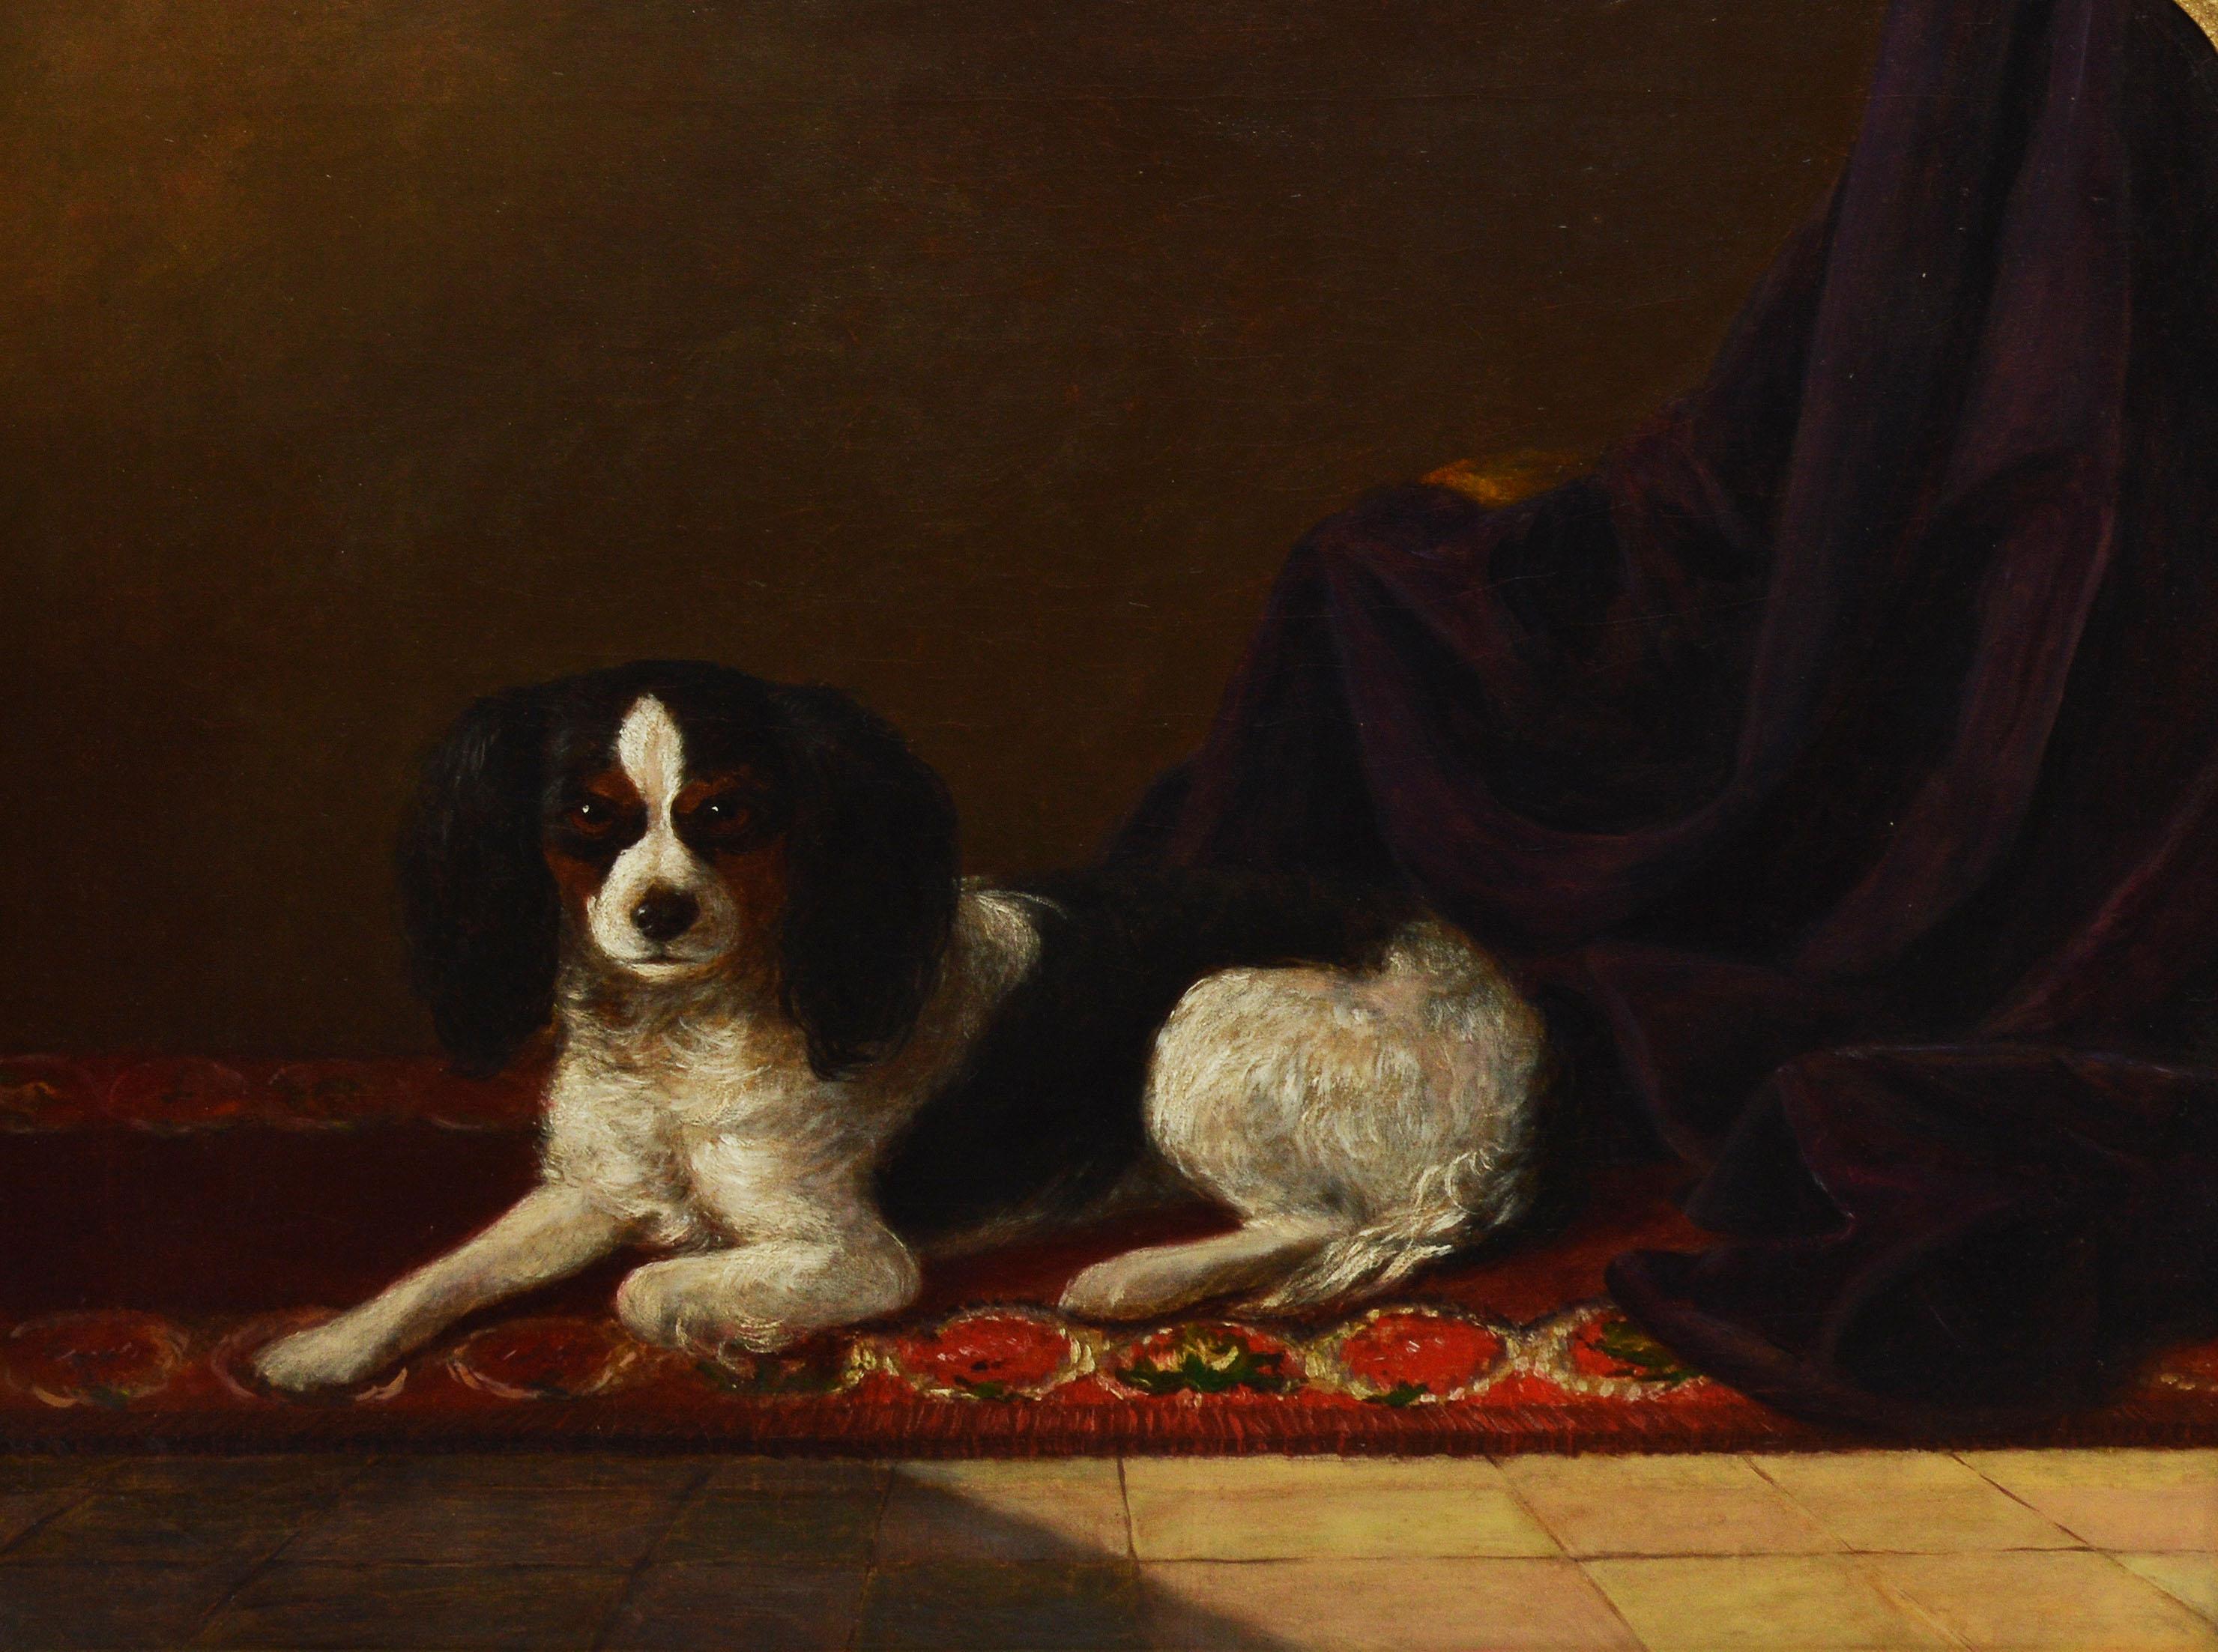 classic dog paintings